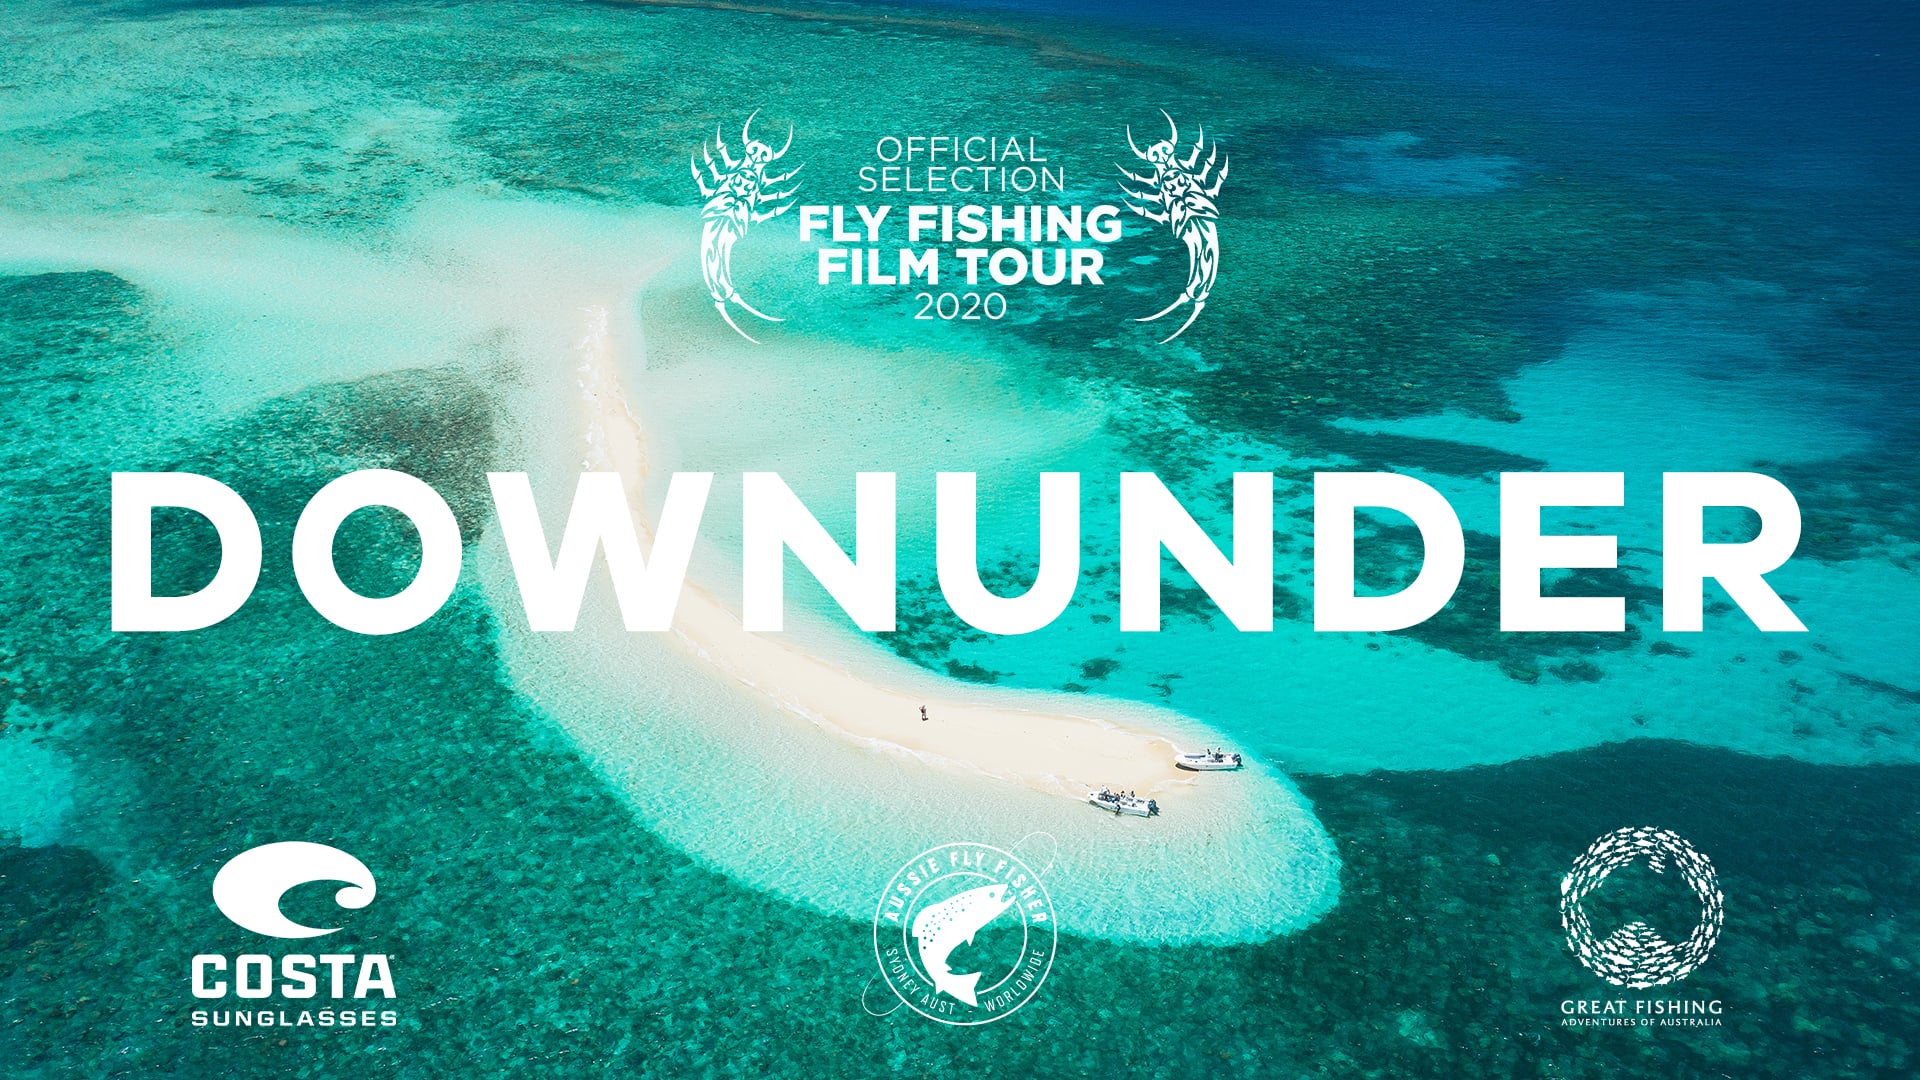 Downunder-Trailer-F3T-Fly-Fishing-Film-Tour-Official-Selection